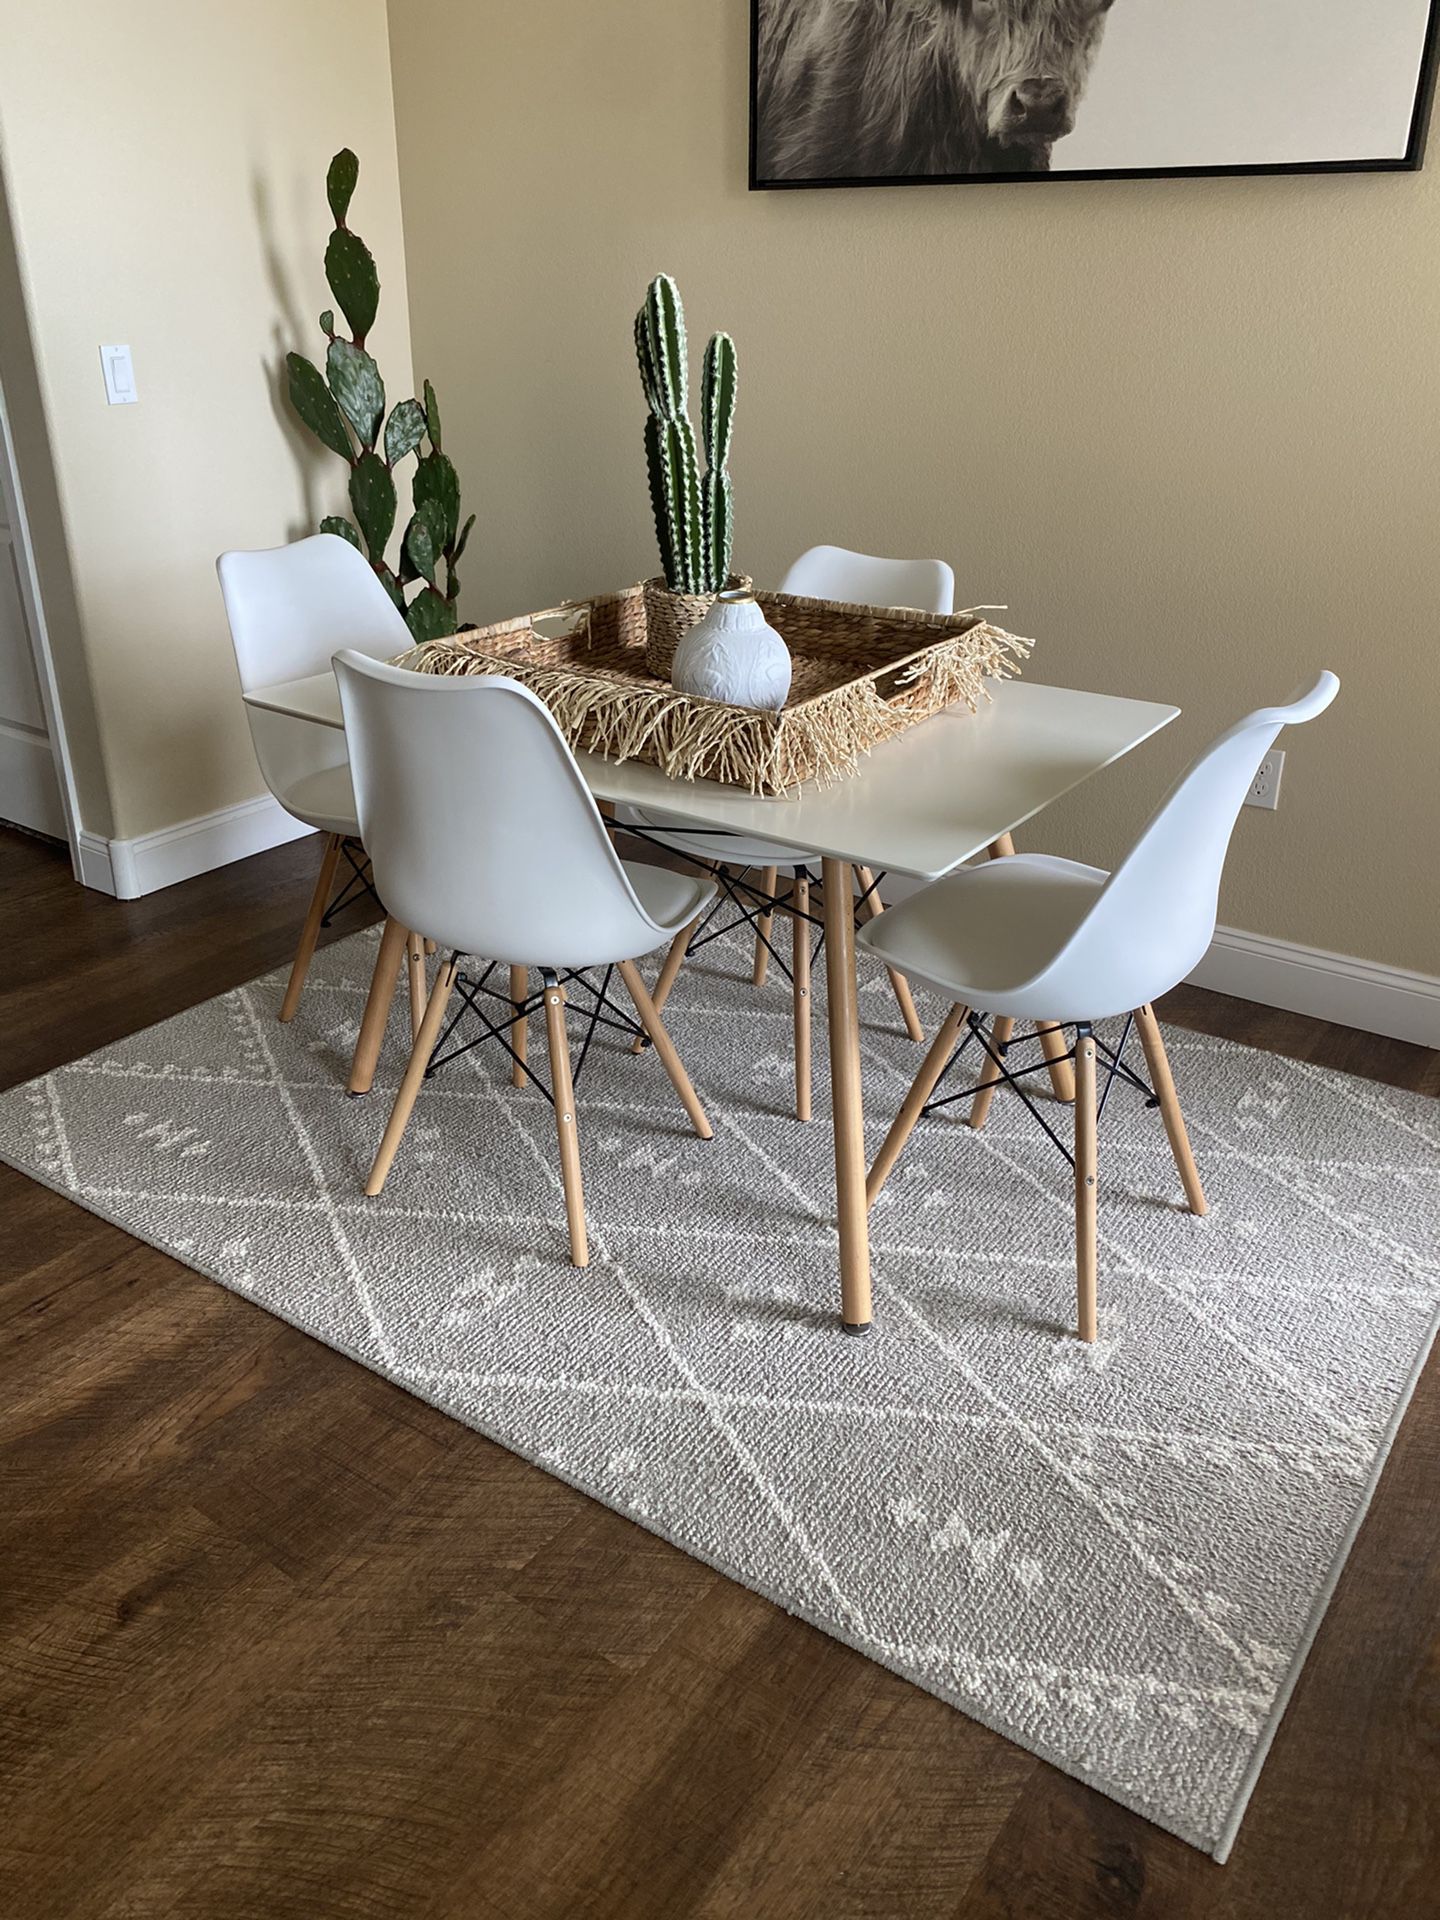 Brand new modern dining table 4 chairs